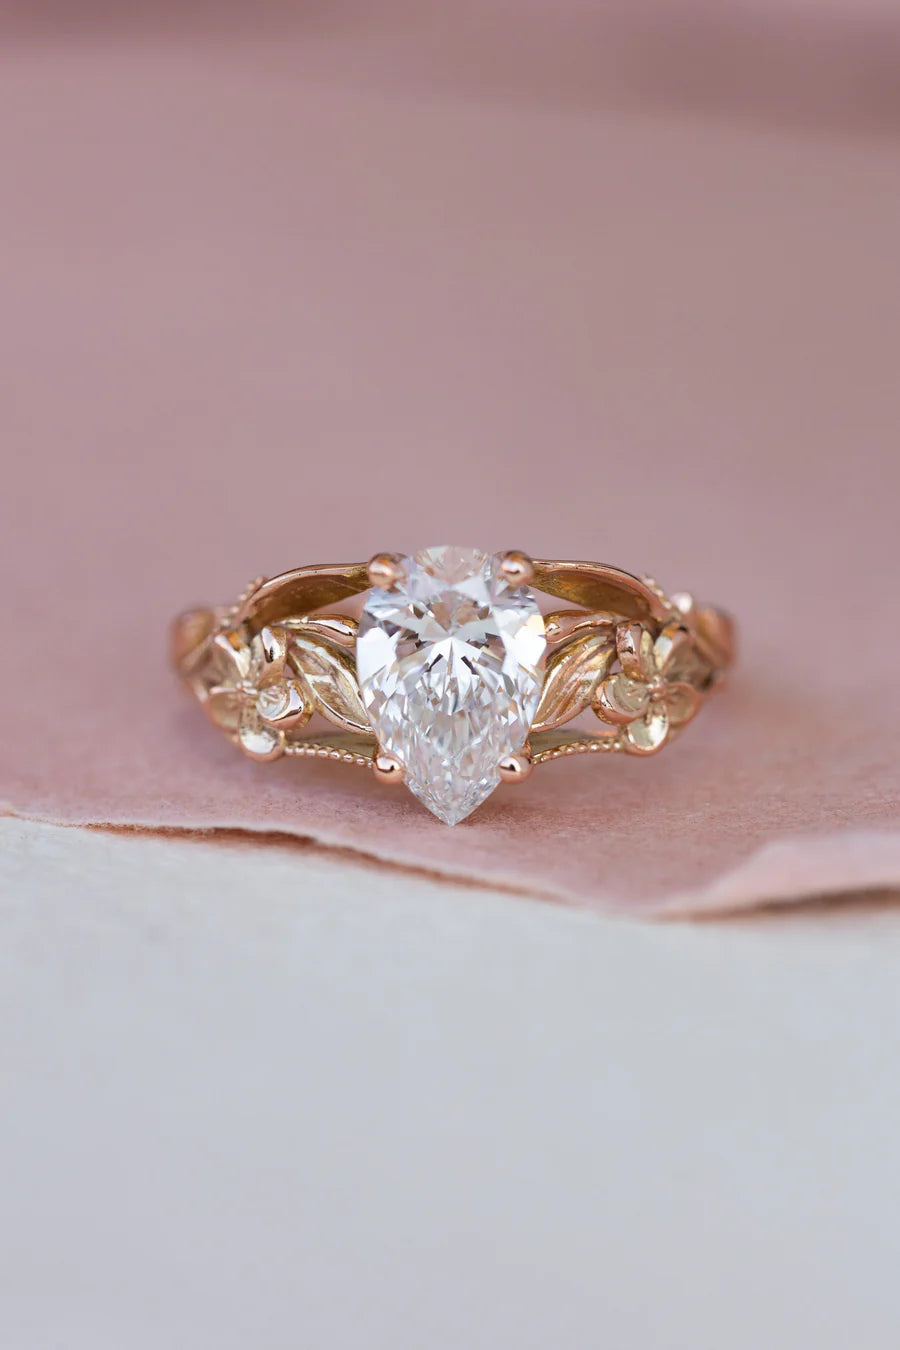 READY TO SHIP: Eloise engagement ring in 14K rose gold, big lab grown diamond, 10x7 mm, AVAILABLE RING SIZES: 5.75-7.75 US